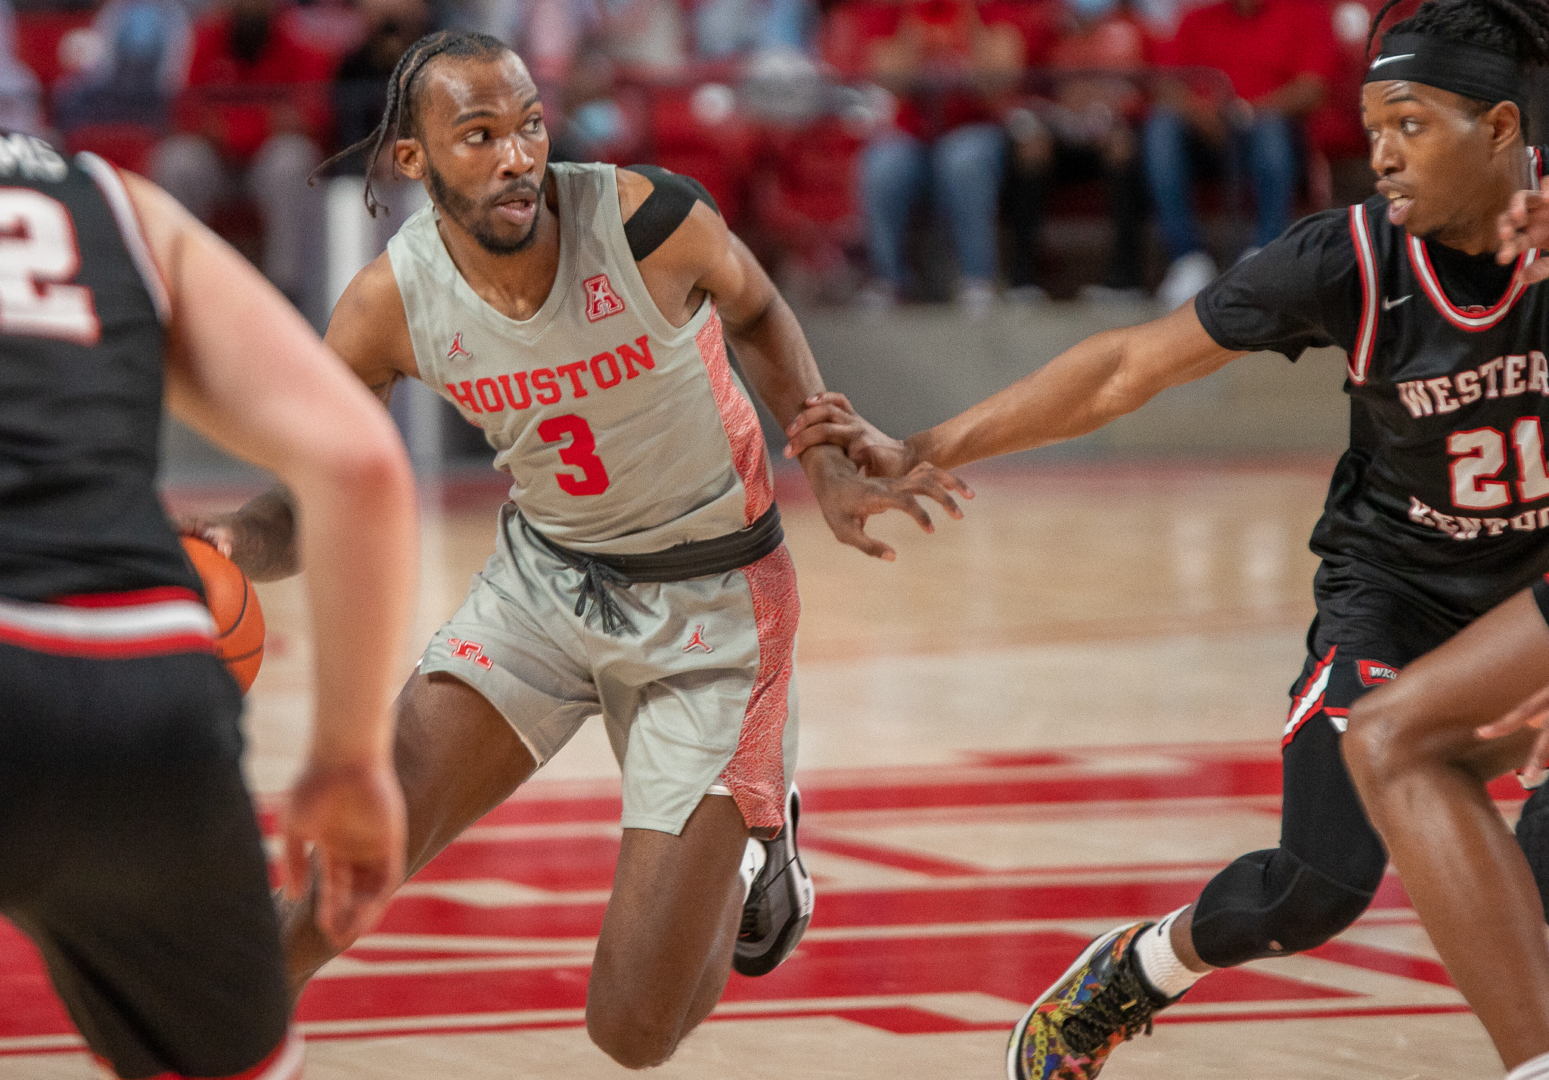 Senior guard DeJon Jarreau recorded the first triple-double for UH basketball since 1993 in the Cougars victory over Tulane in the AAC quarterfinals | Andy Yanez/The Cougar